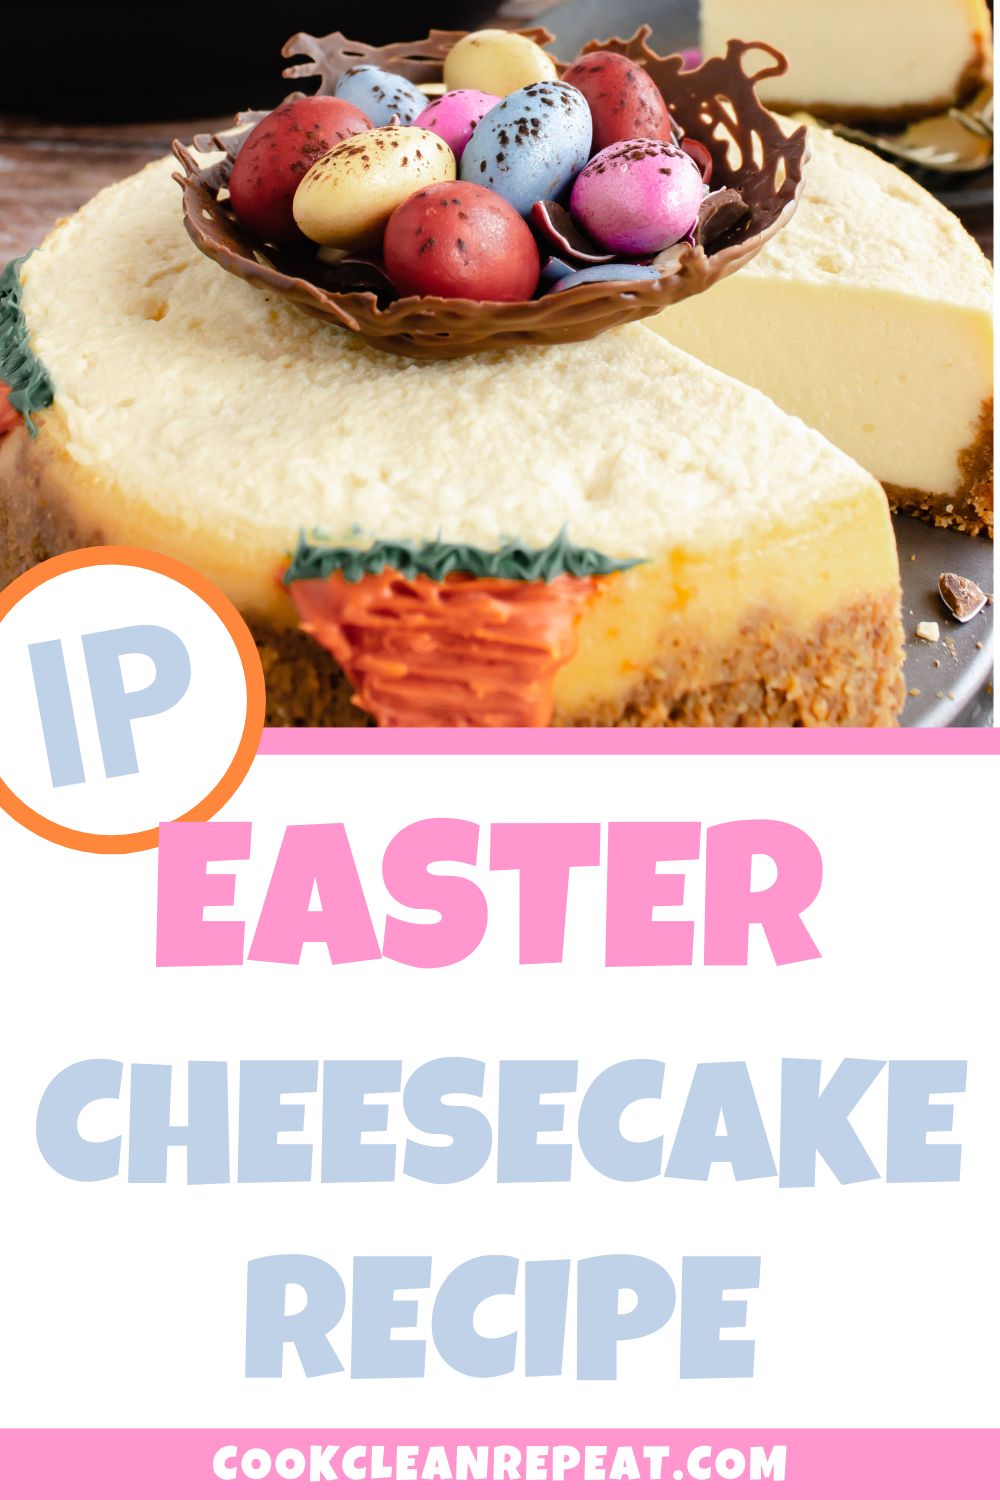 Pinterest image for Easter cheesecake recipe